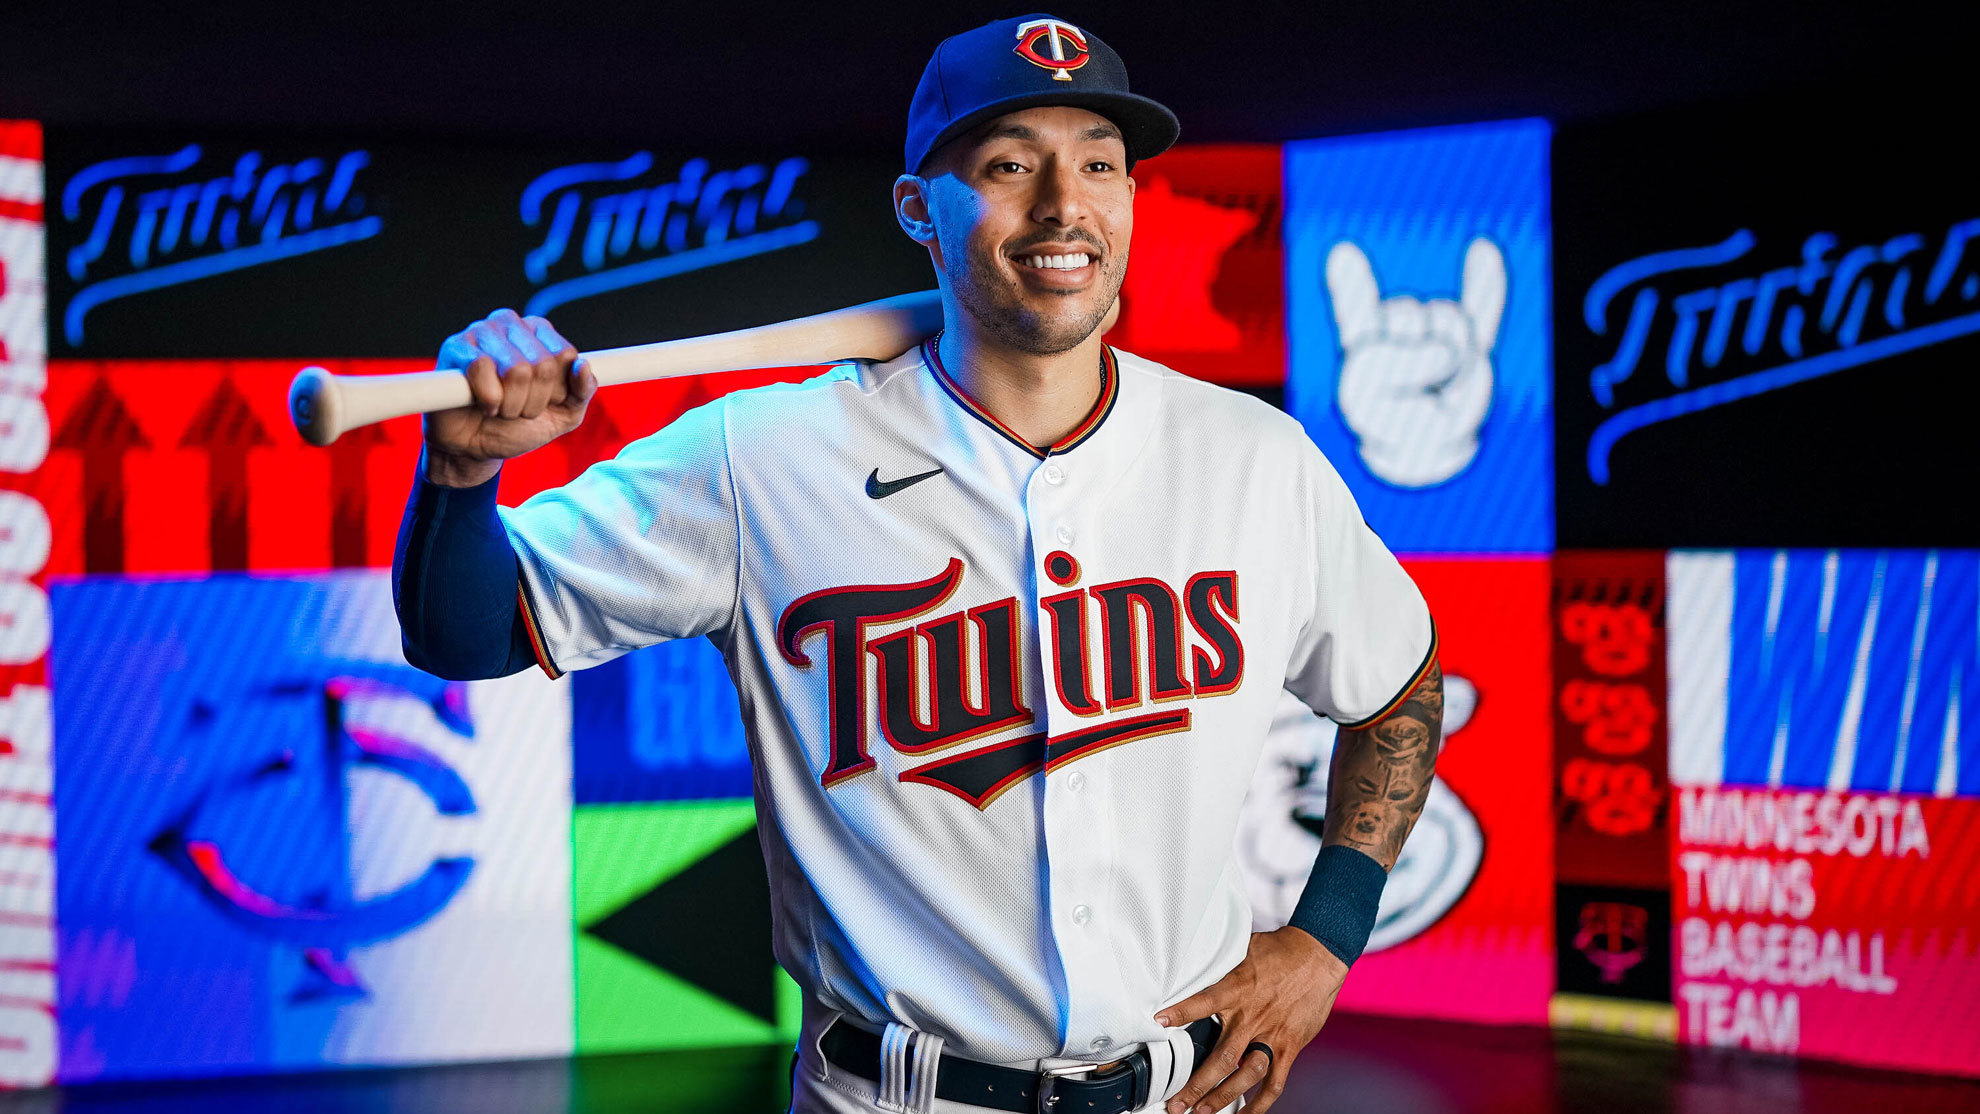 Carlos Correa: “I want to build a winning culture in the Twins”